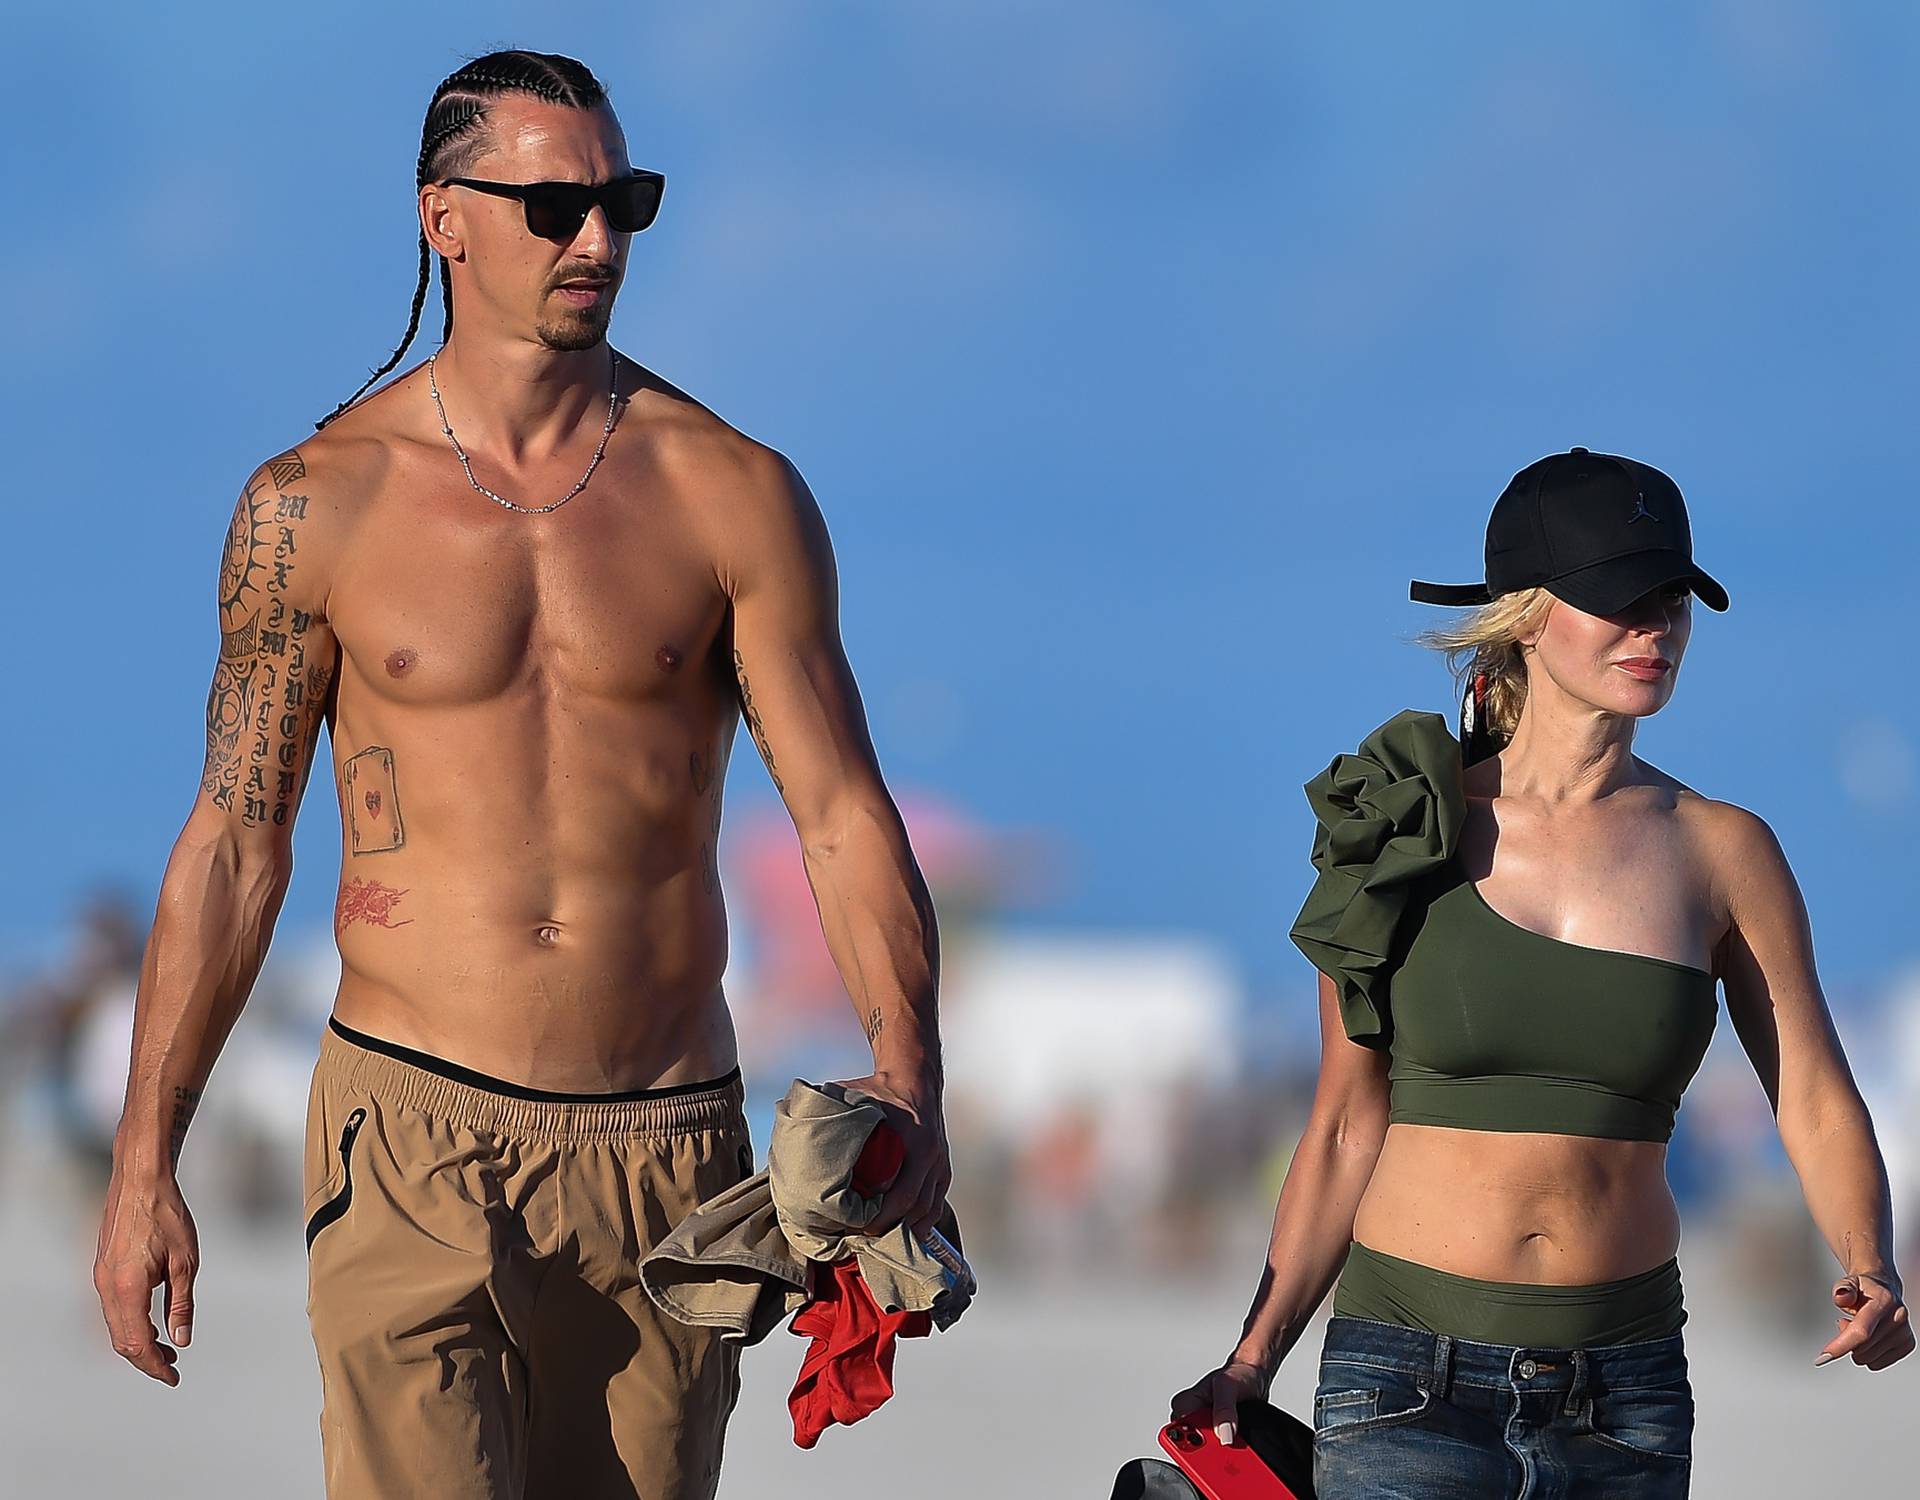 EXCLUSIVE: Zlatan Ibrahimovic Shows Off His Impressive Physique As He Heads To Muscle Beach  With Partner Helena Seger To Have Some Fun In Miami Beach, Florida